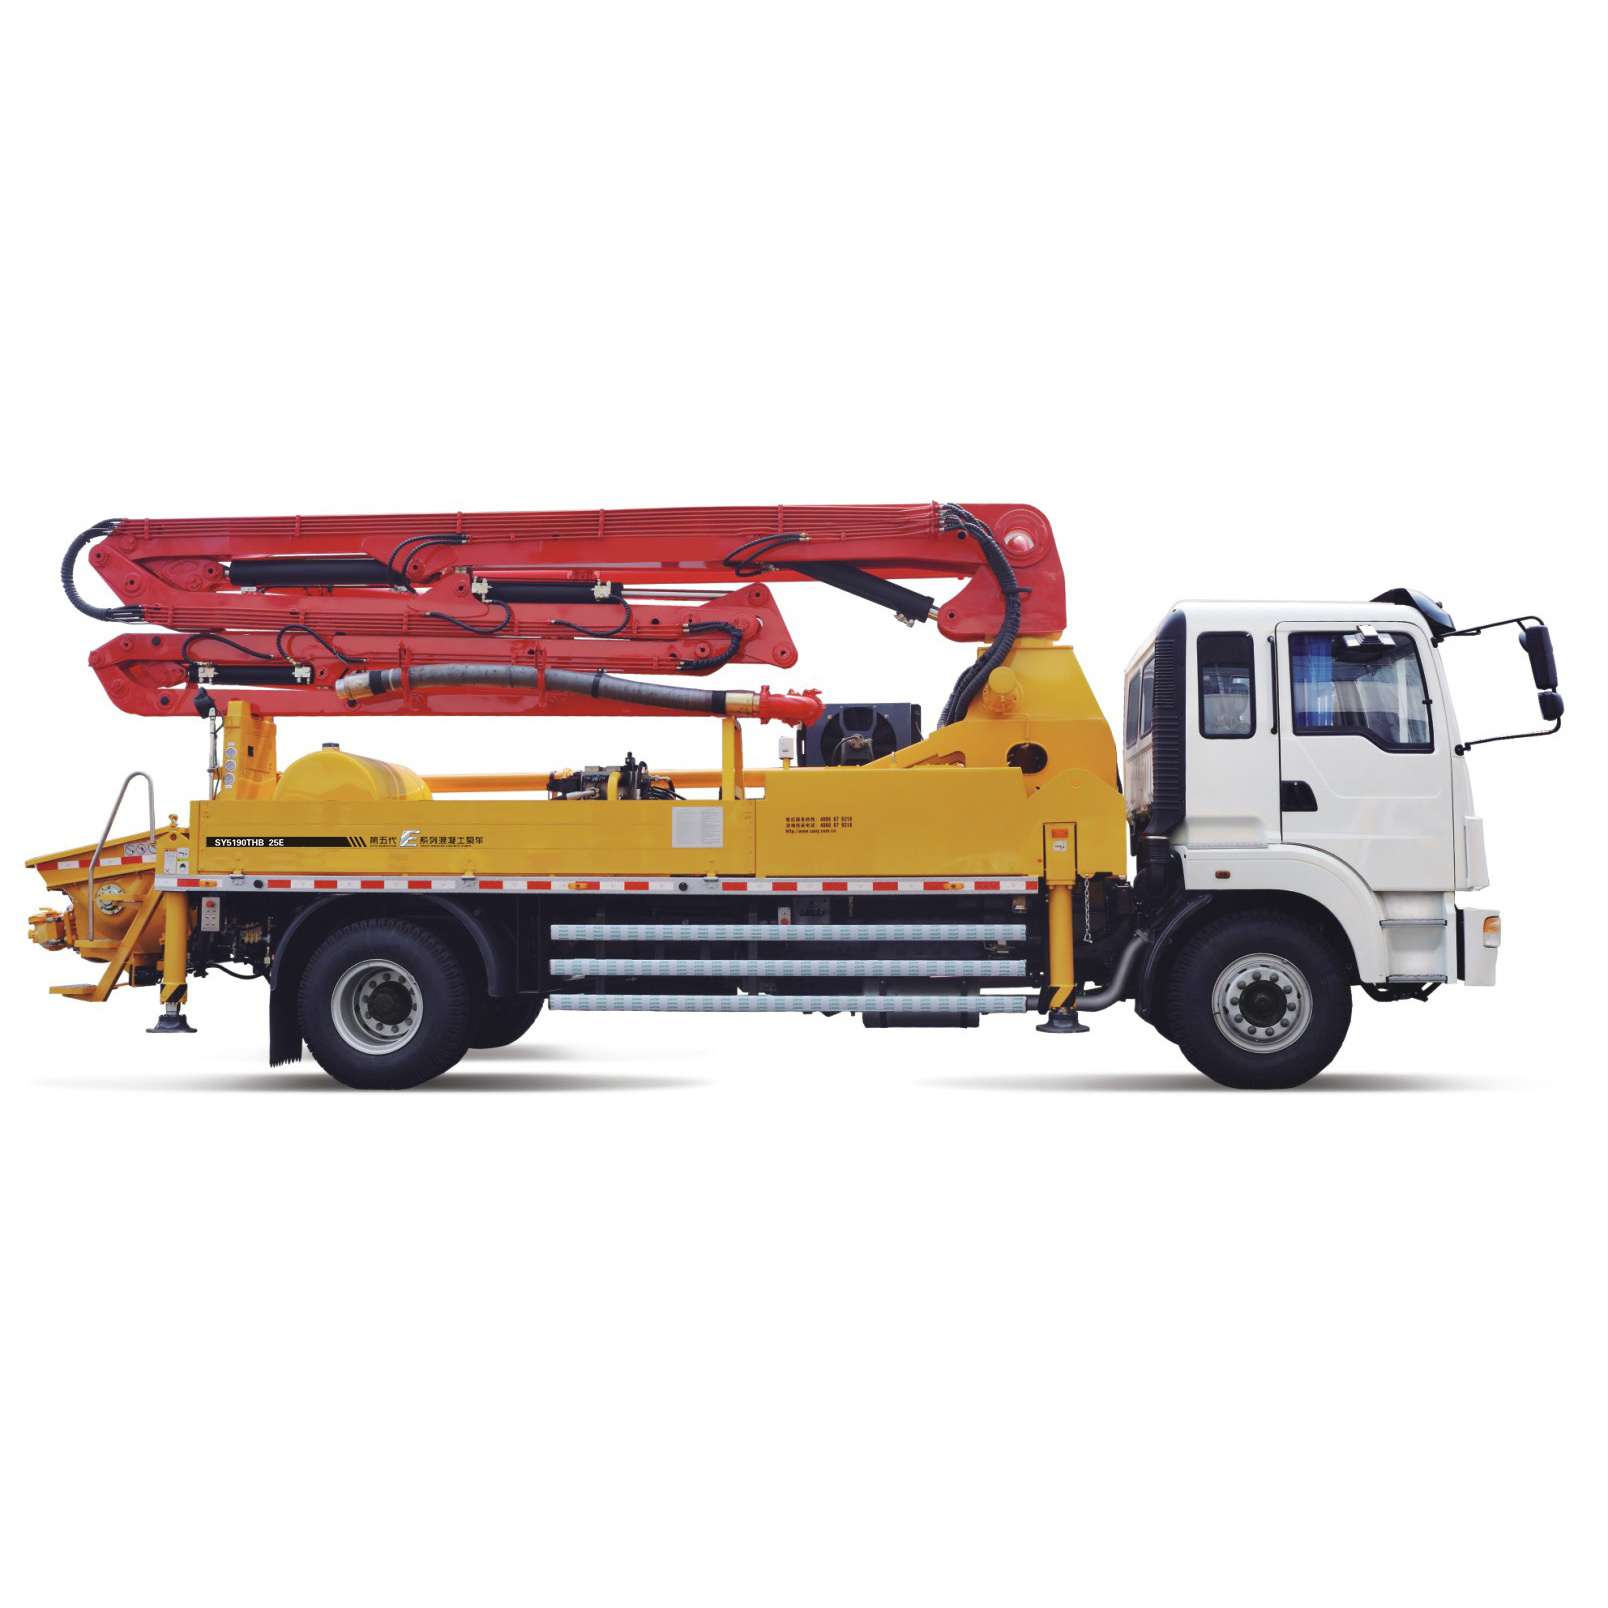 
                Snay 51m Truck-Mounted Concrete Pump Sym5360thbes 510c-10
            